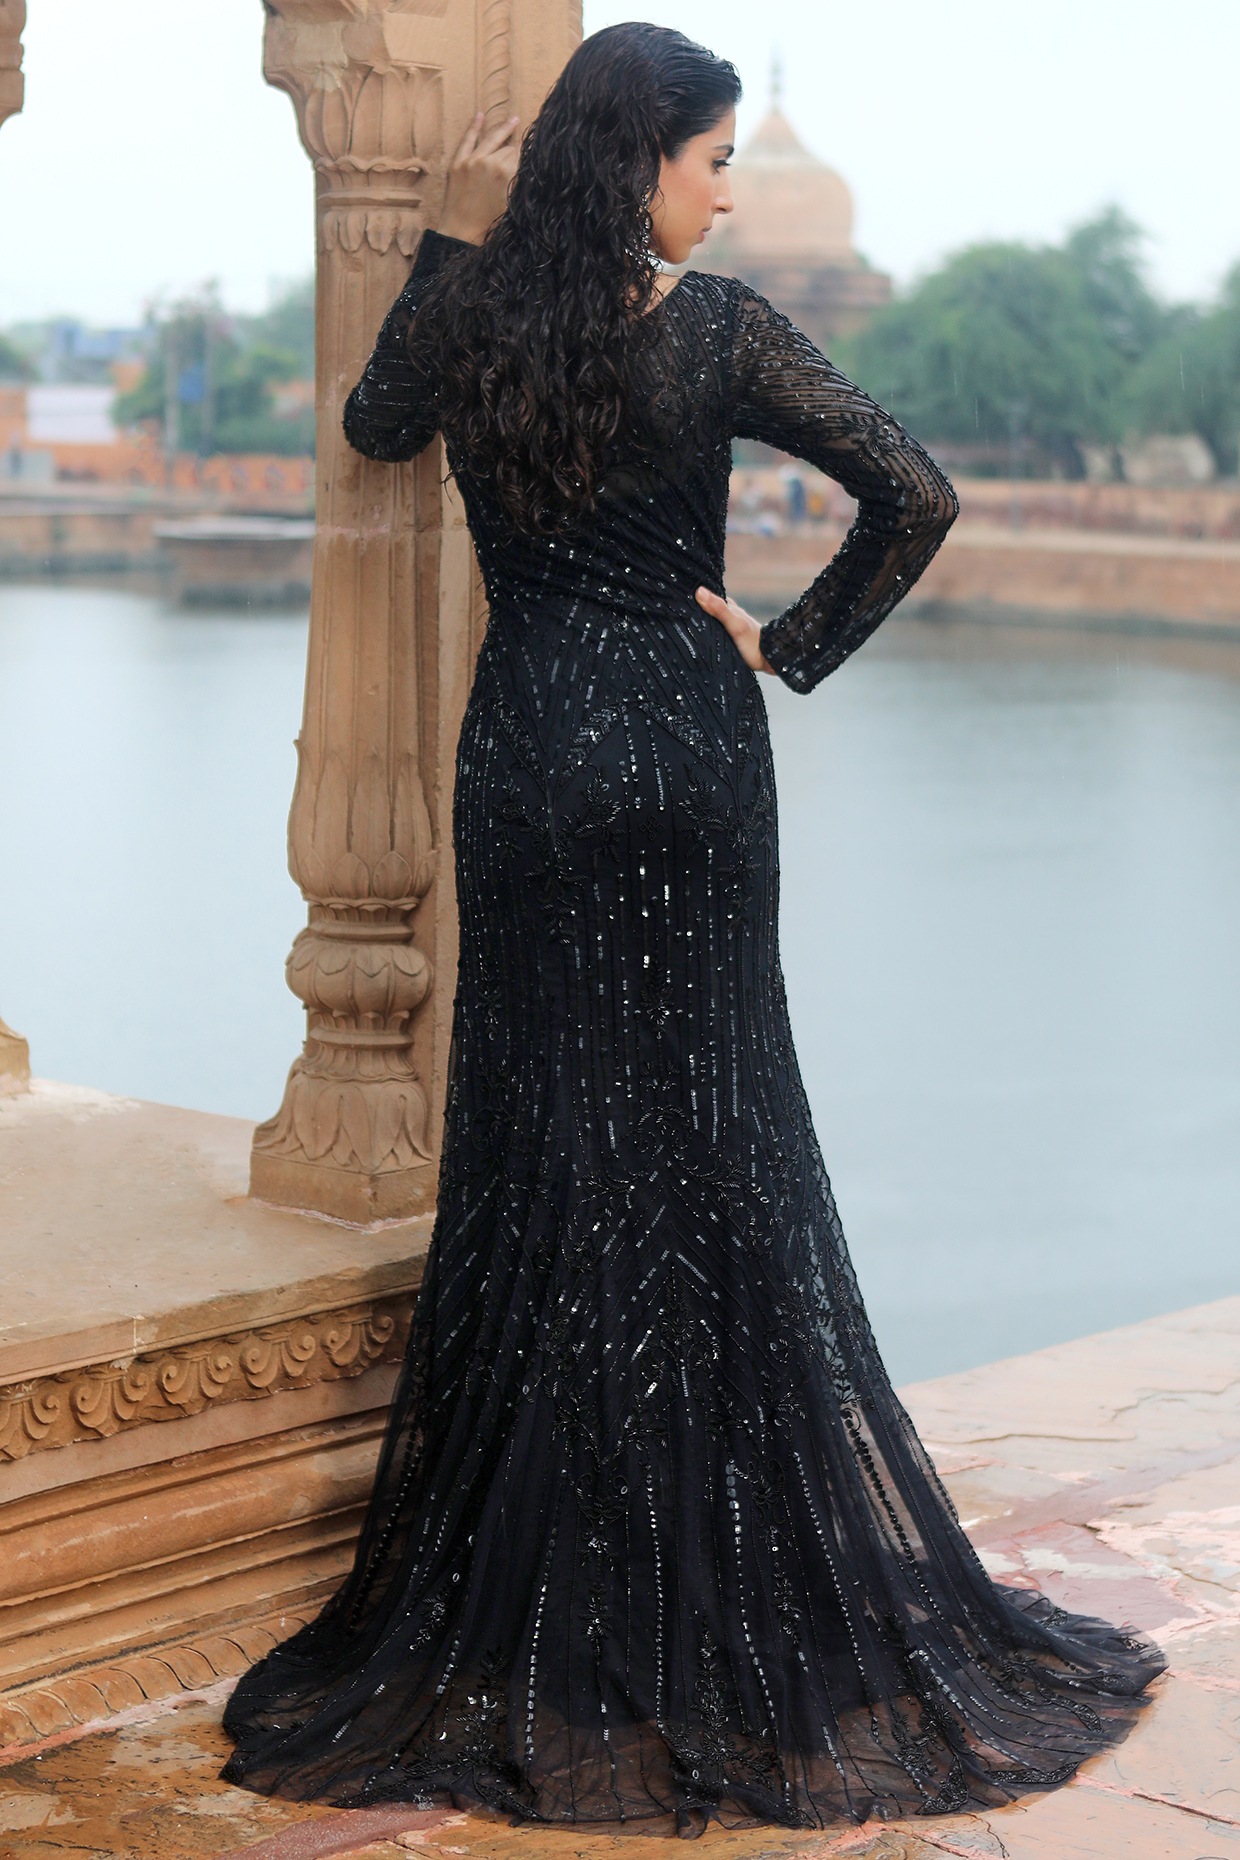 Stunning Mermaid Black Mermaid Prom Dress With Appliqued Long Sleeves,  Jewel Neckline, And Satin Sweep Train Perfect For African Evening Events  And Formal Occasions Available In Plus Sizes From Weddingteam, $121.77 |